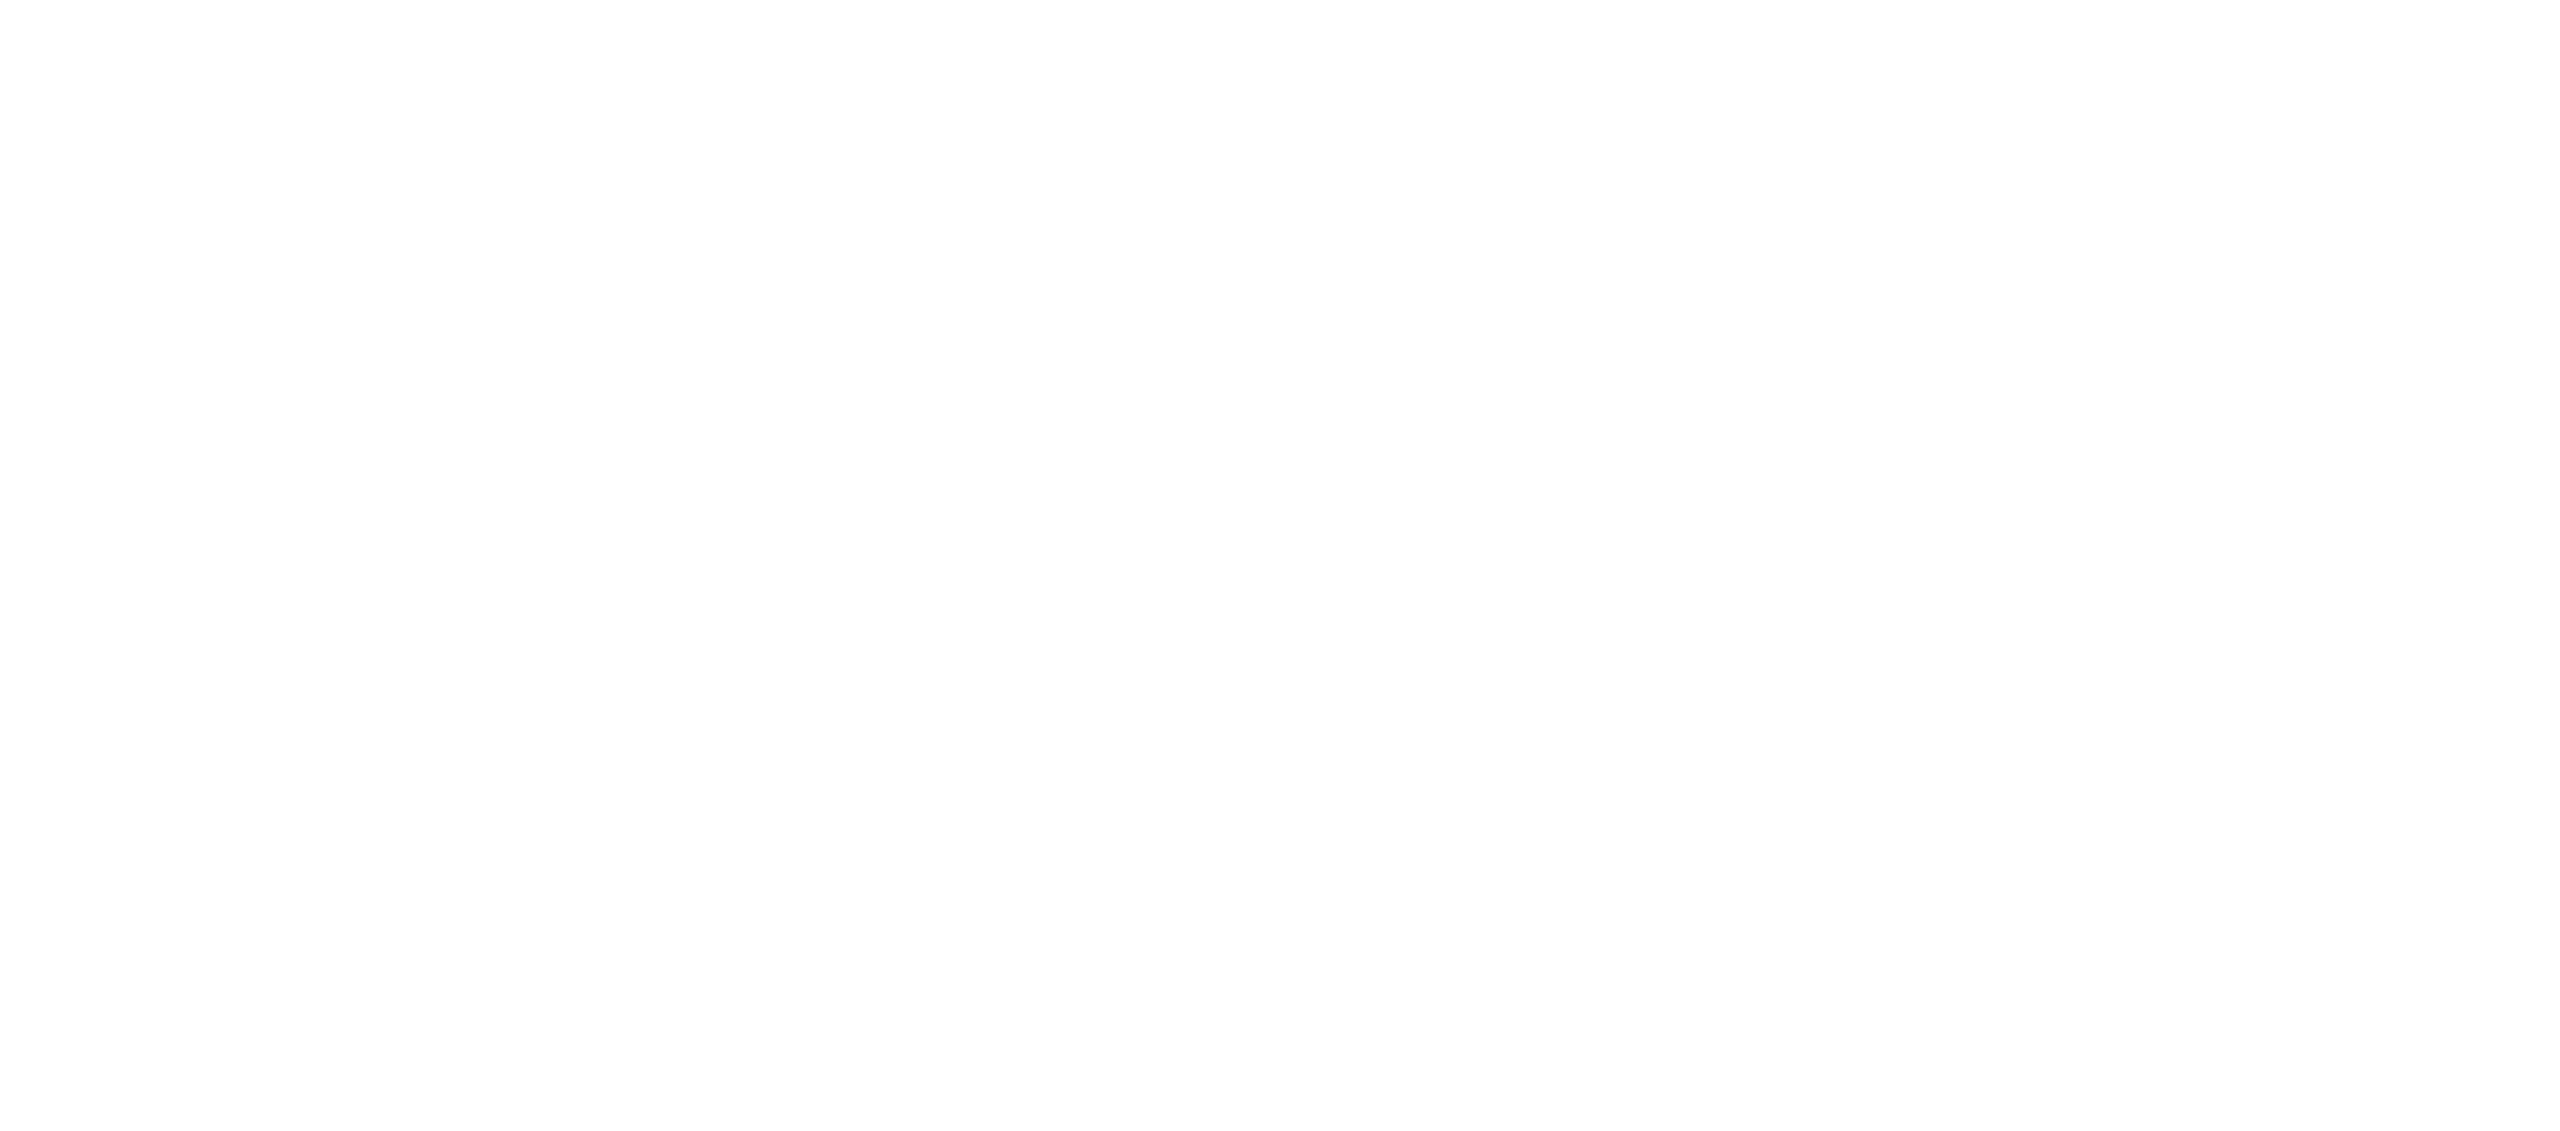 HOUSE OF HR